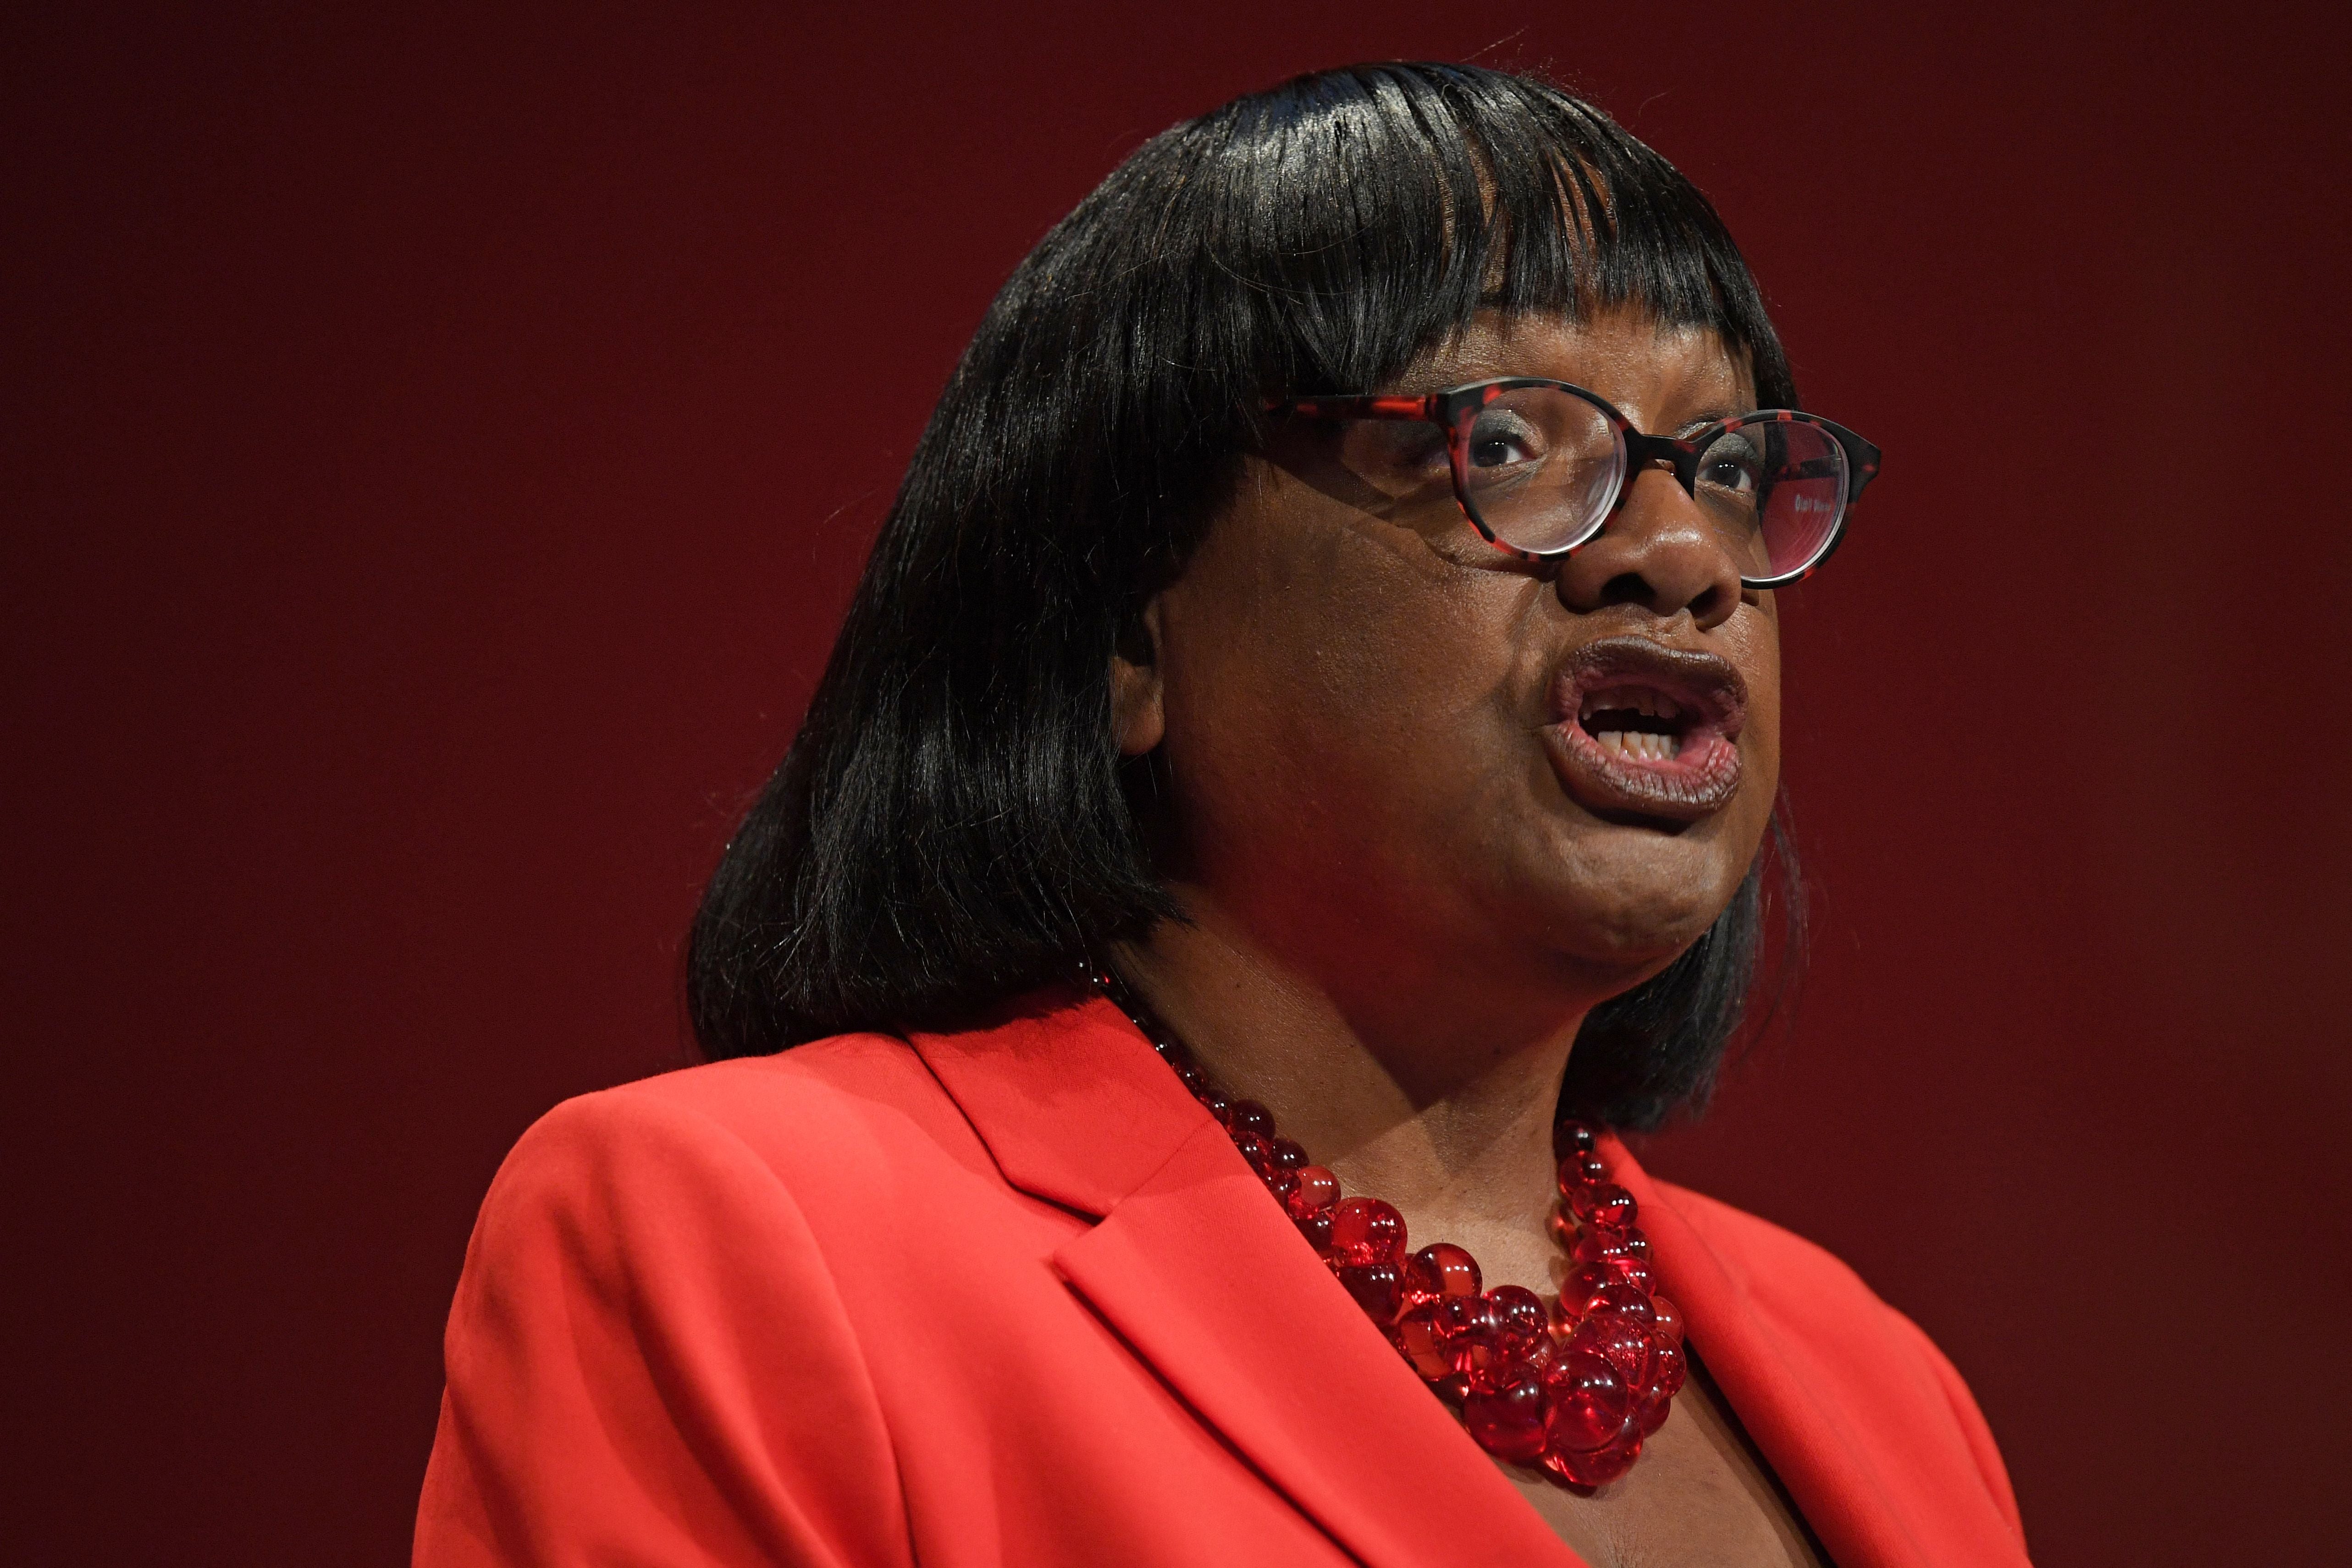 Diane Abbott said Mr Hester’s comments were ‘frightening’ and has reported him to the police